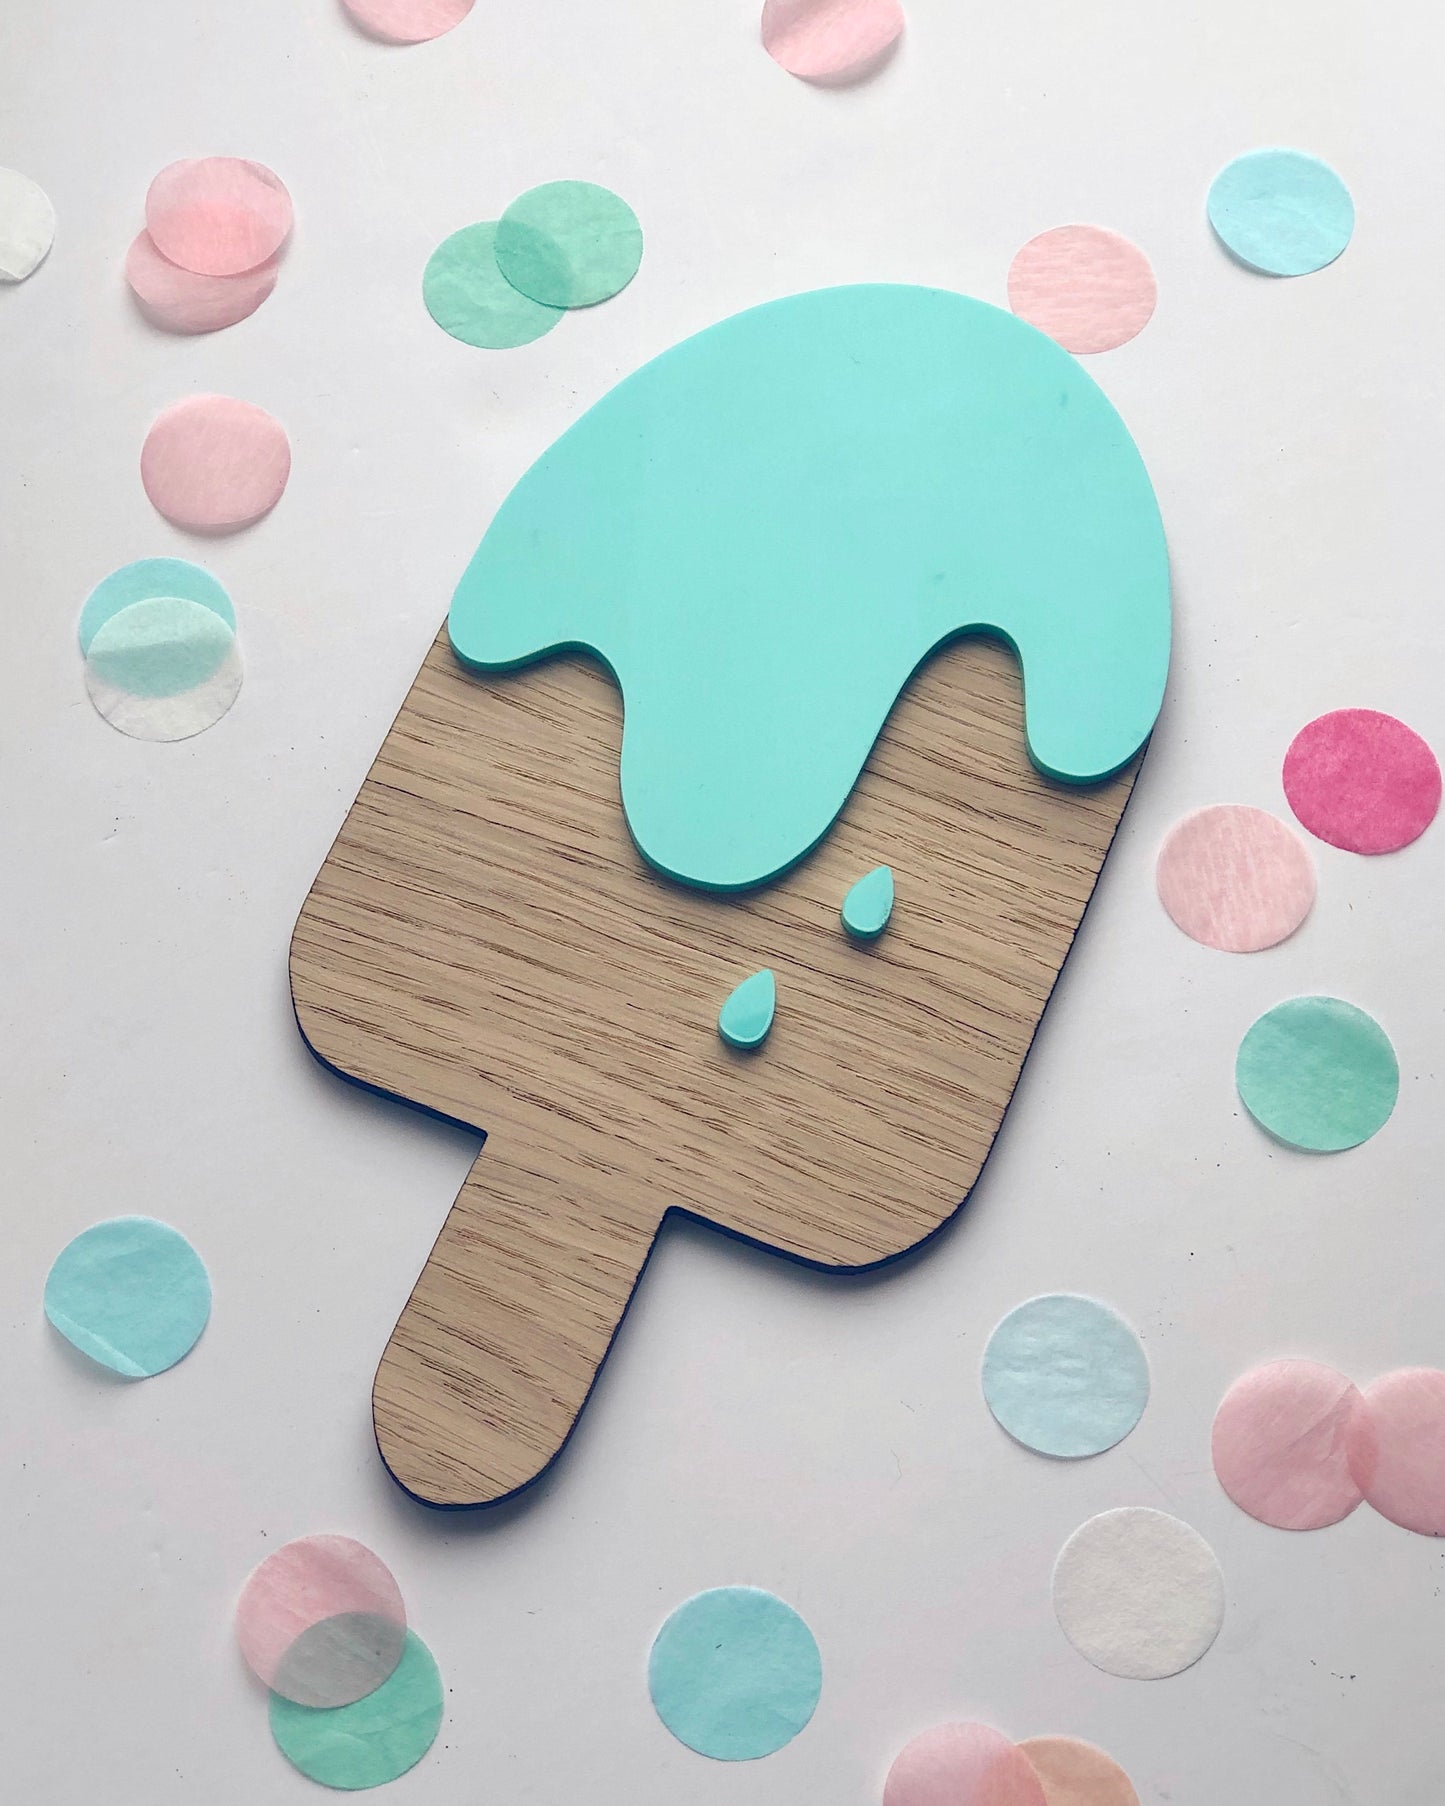 Wooden ice lolly wall decoration with mint green acrylic details